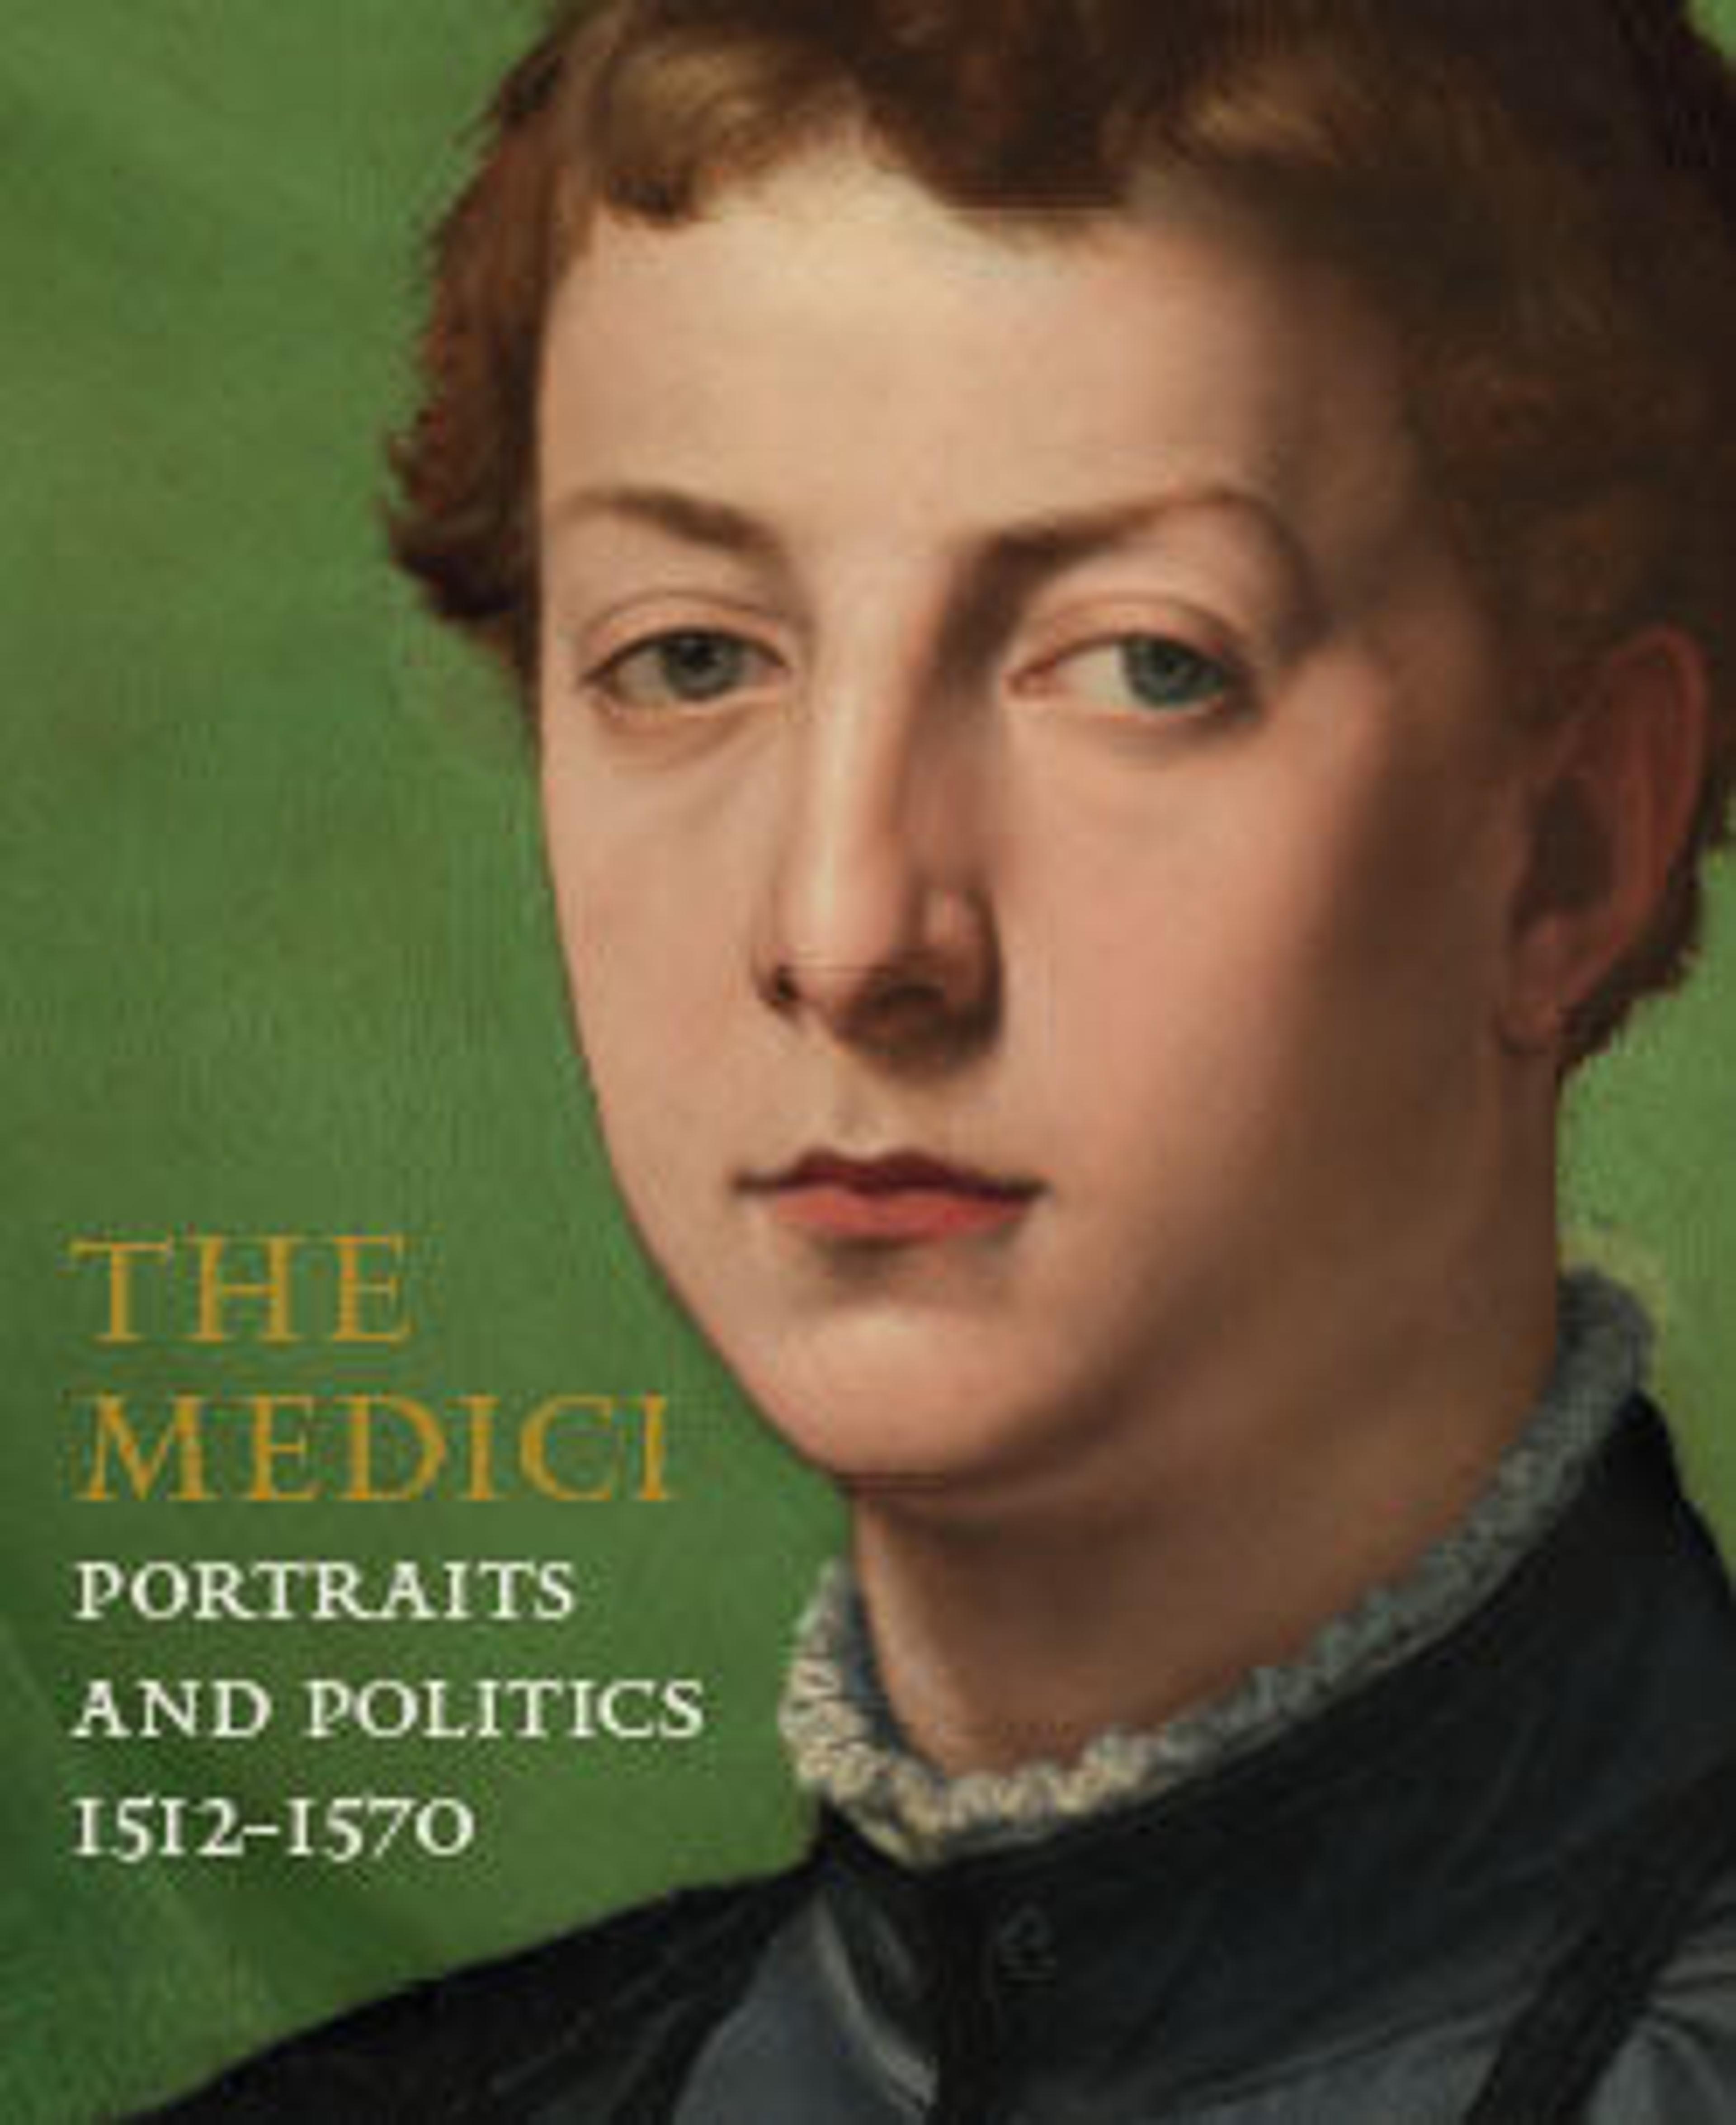 The cover of the catalogue The Medici: Portraits and Politics 1512–1570. A young man wearing a black taffeta jacket looks at the viewer.